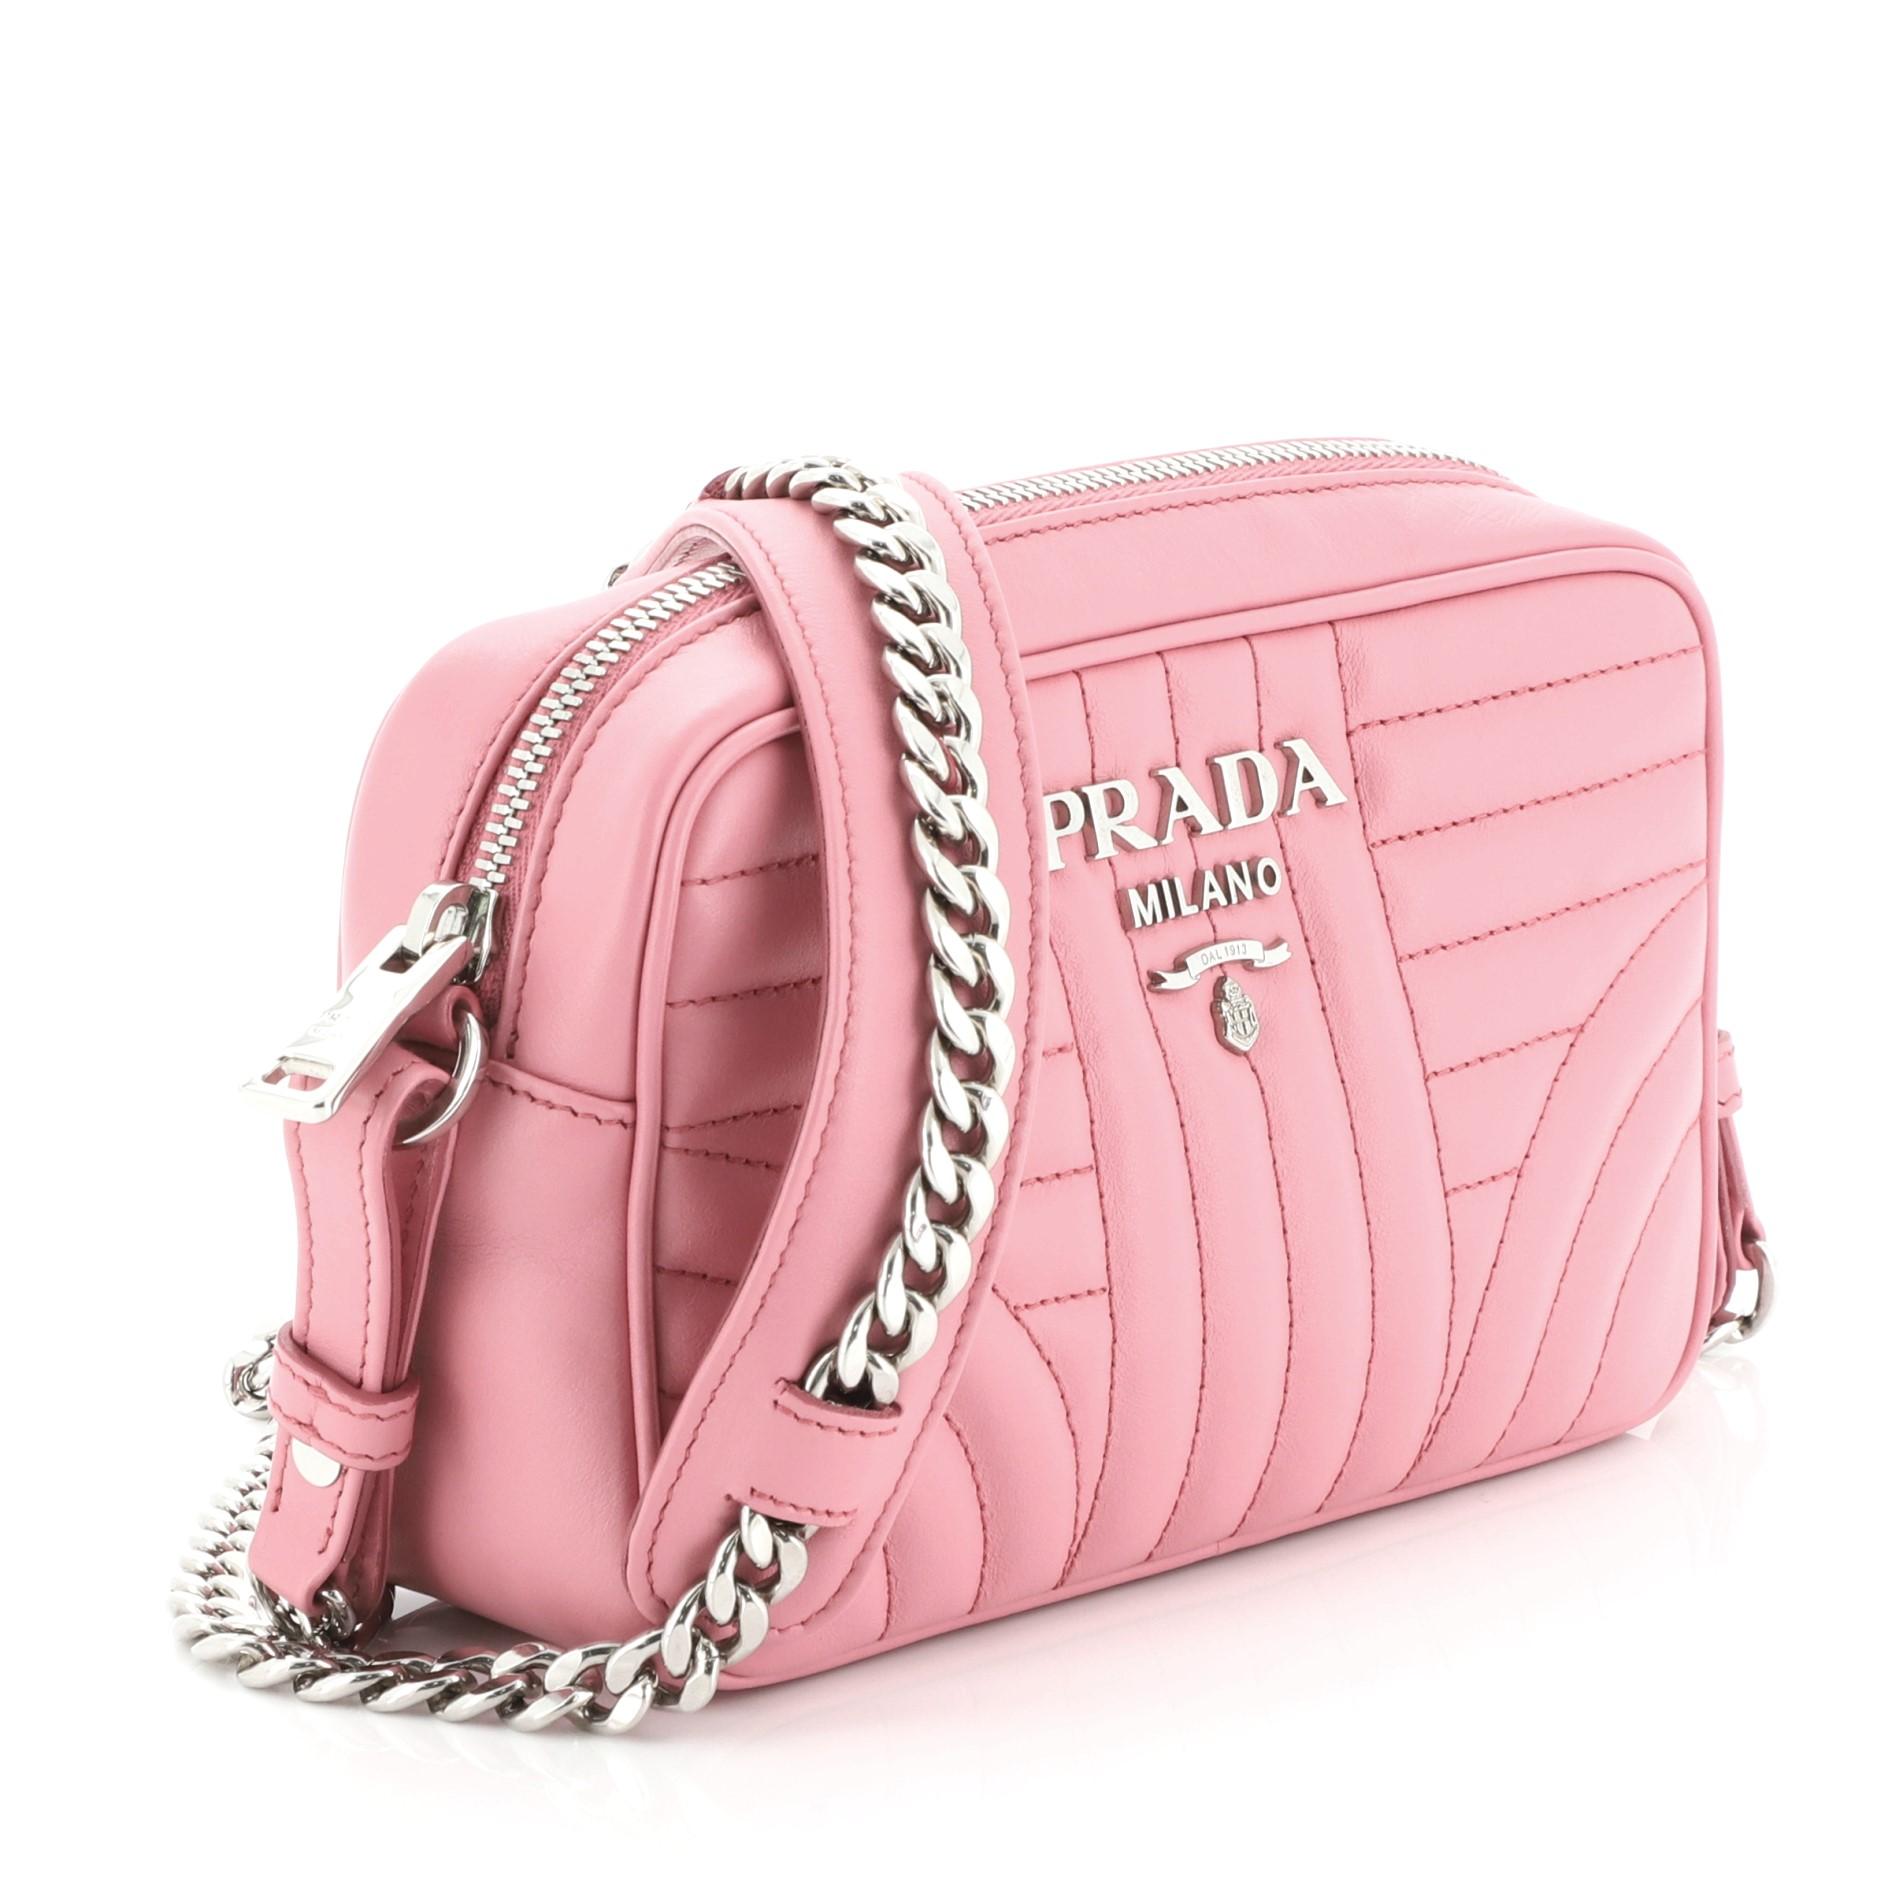 This Prada Camera Bag Diagramme Quilted Leather Mini, crafted from pink diagramme quilted leather, features a chain link strap and silver-tone hardware. Its zip closure opens to a pink fabric interior with slip pocket. 

Estimated Retail Price: